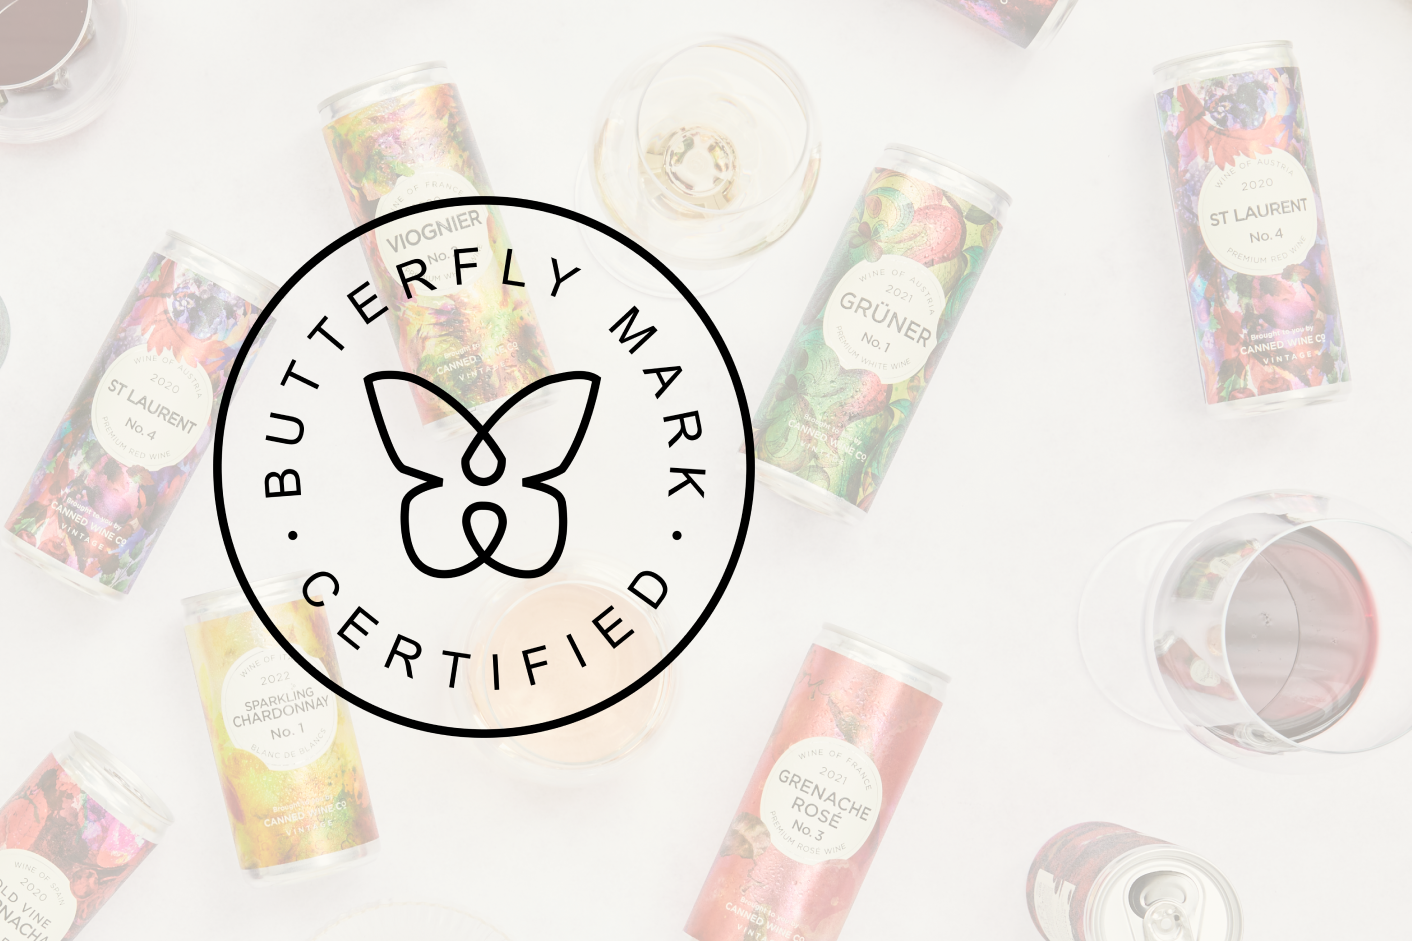 Chapter 9 - Canned Wine Co. is now Butterfly Mark certified!